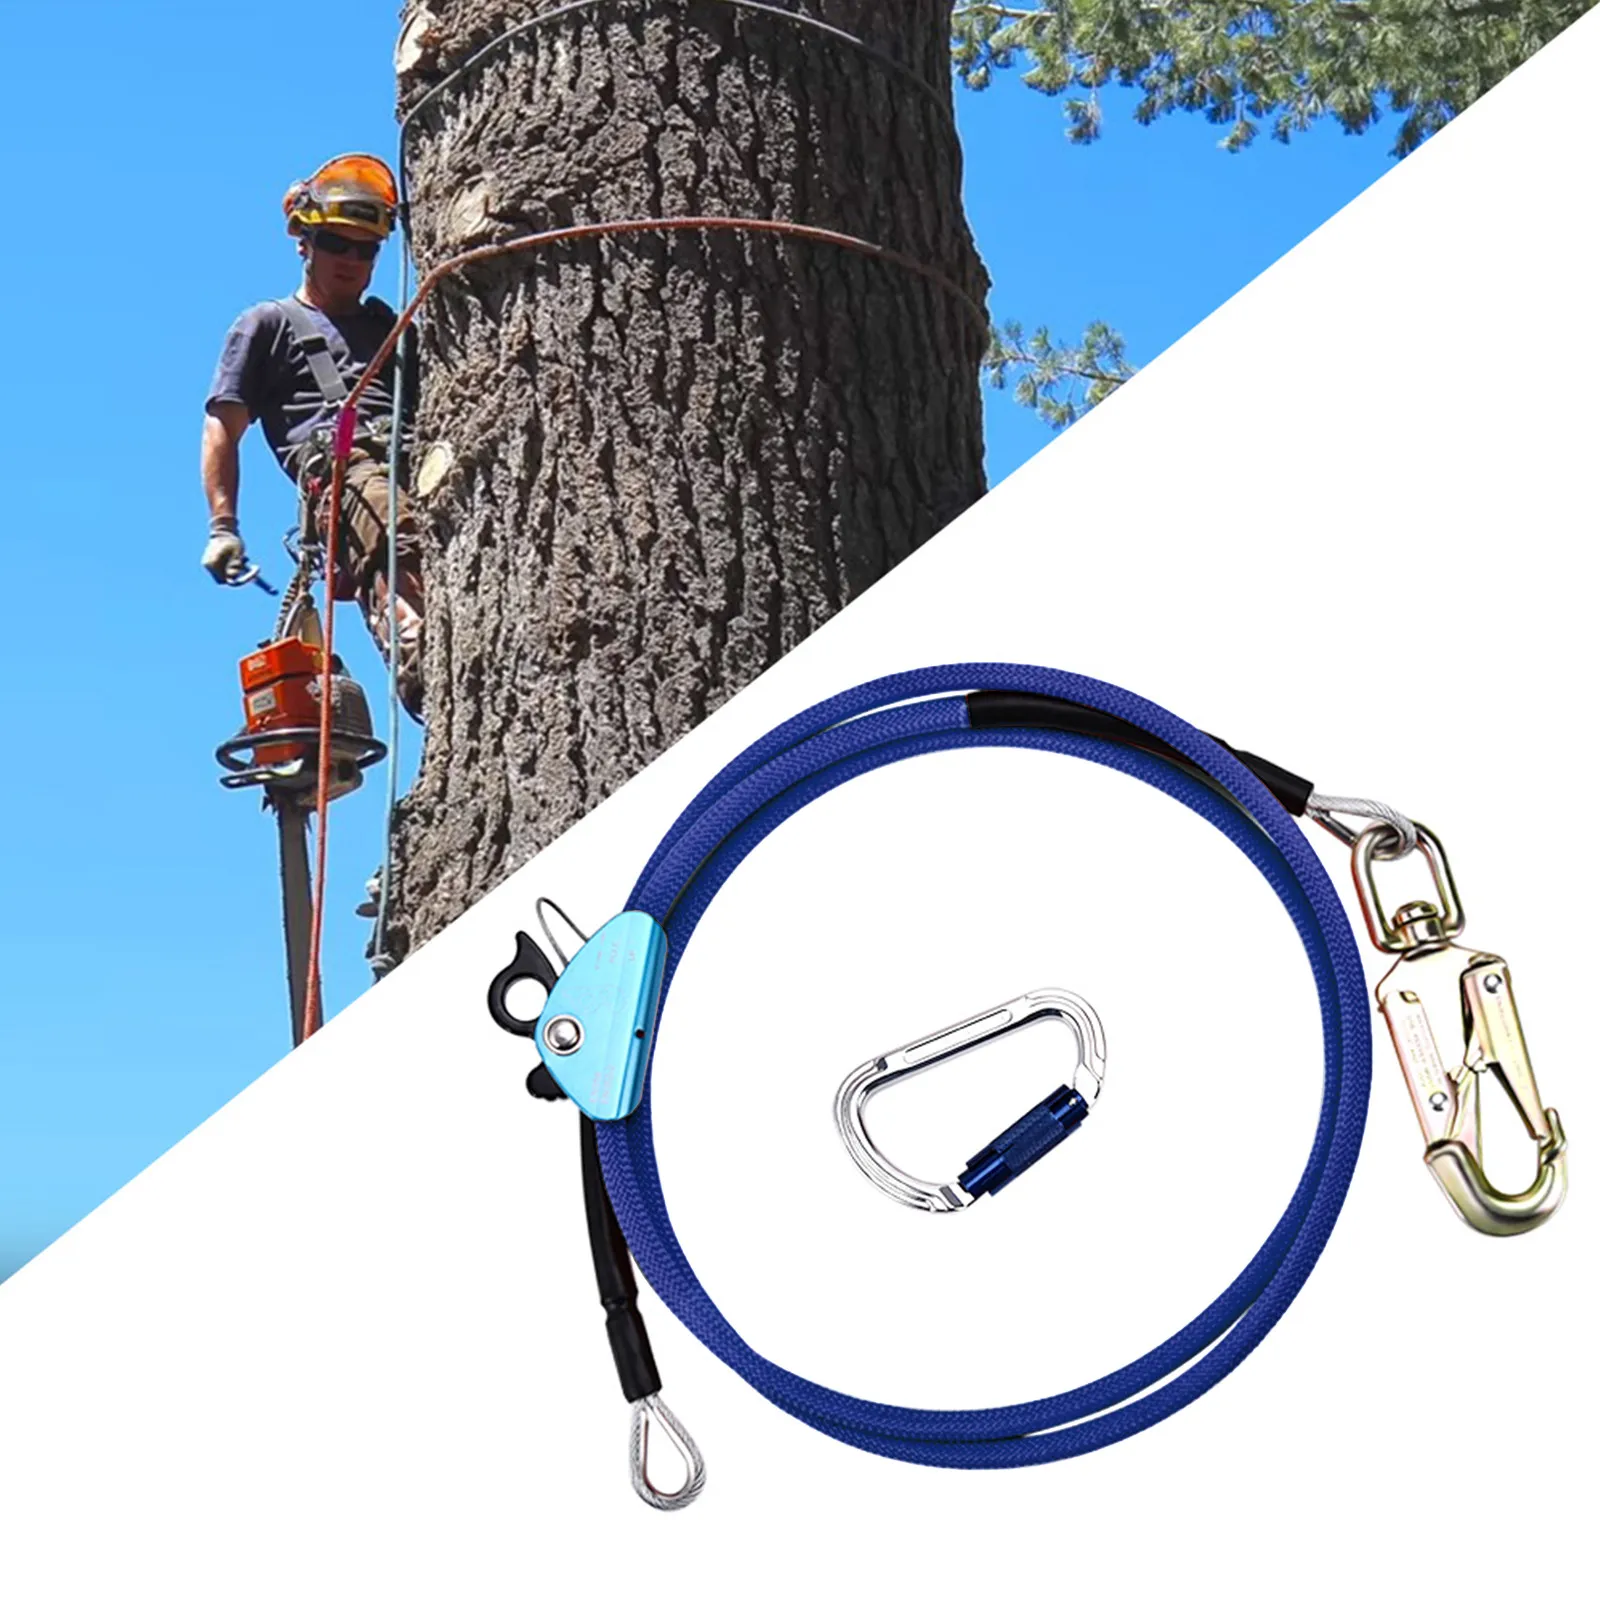 1/2 In X 12ft Steel Wire Core Flip Line Kit Climbing Positioning Rope For Arborists Climbers Tree Climbers For Arborist EU Stock